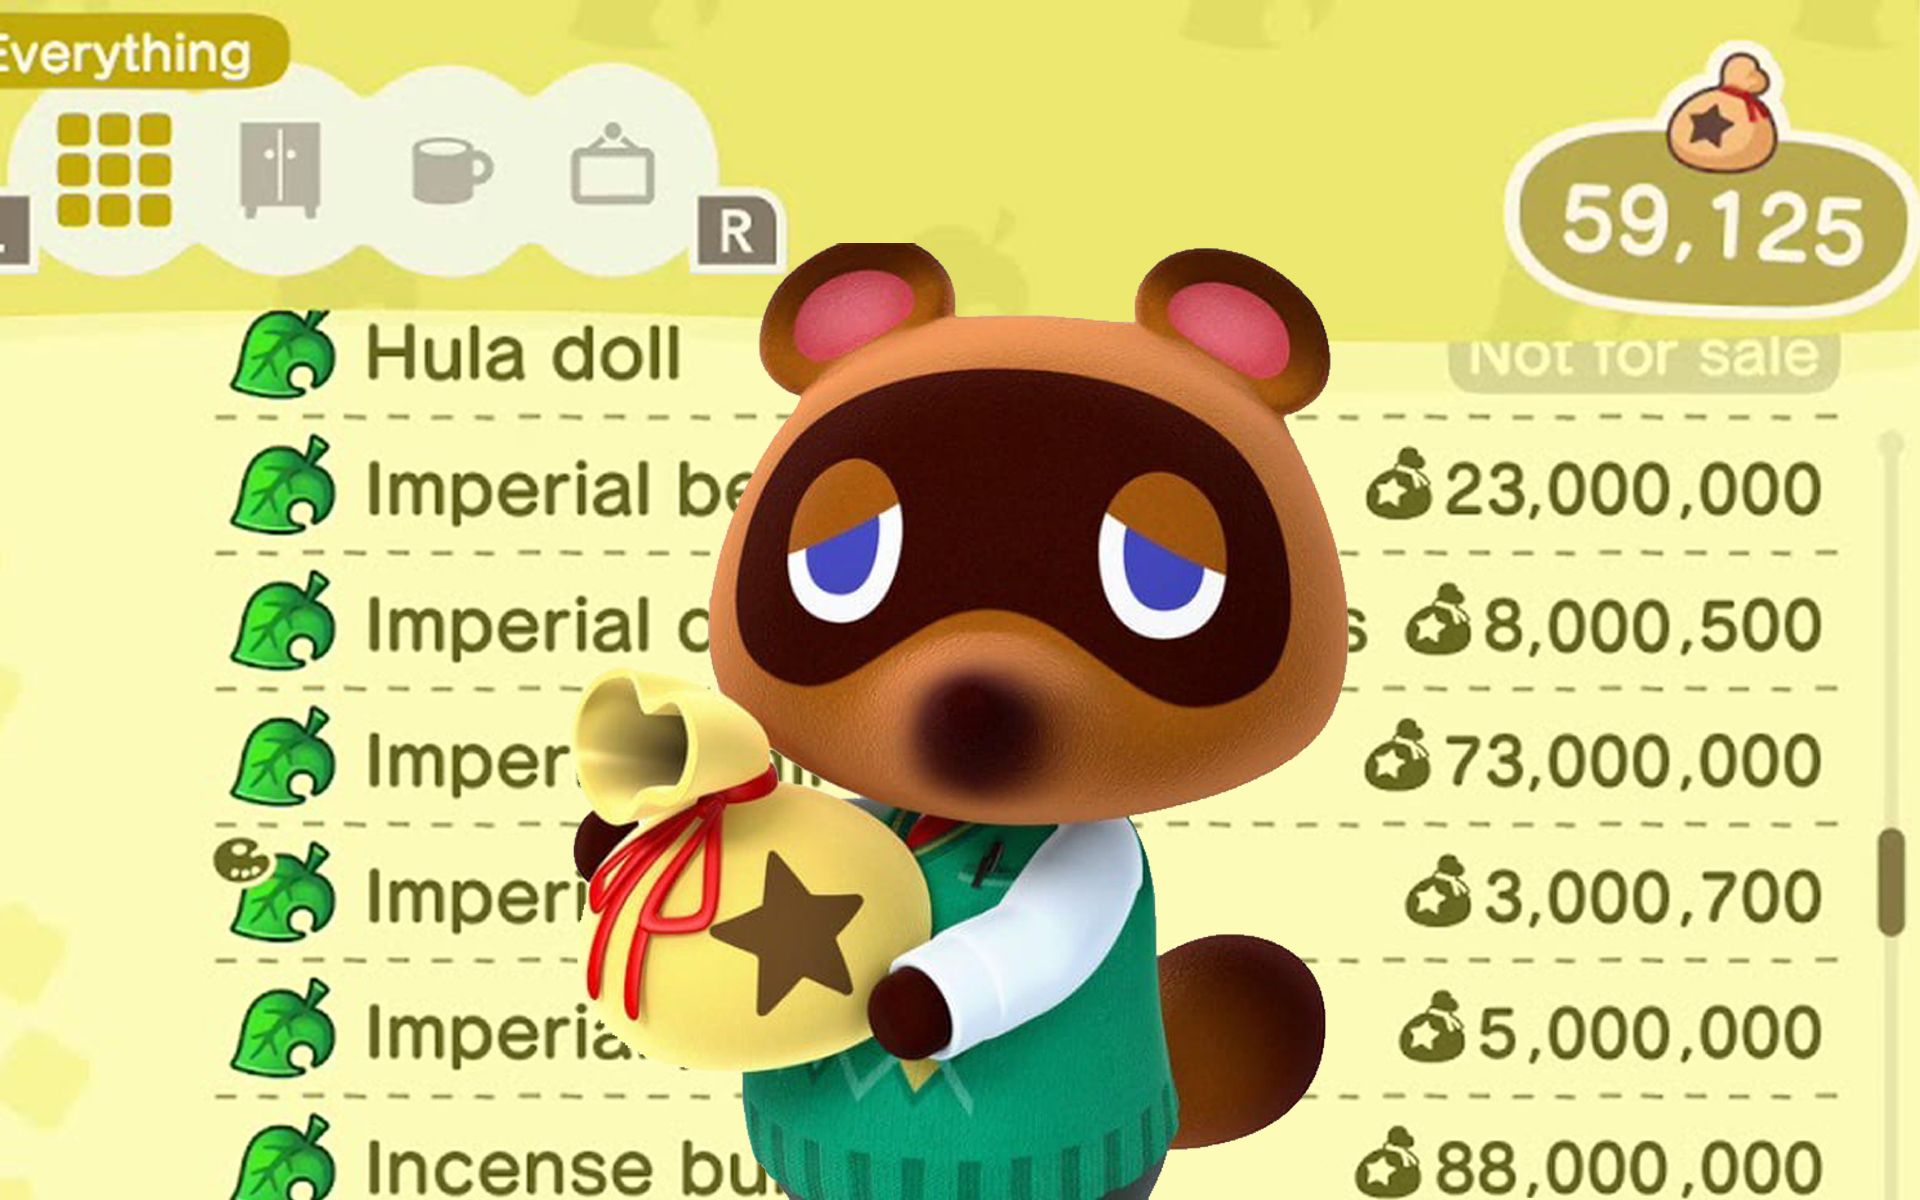 New Animal Crossing Update Increases Shop Prices And Cuts Selling Prices For "Inflation"